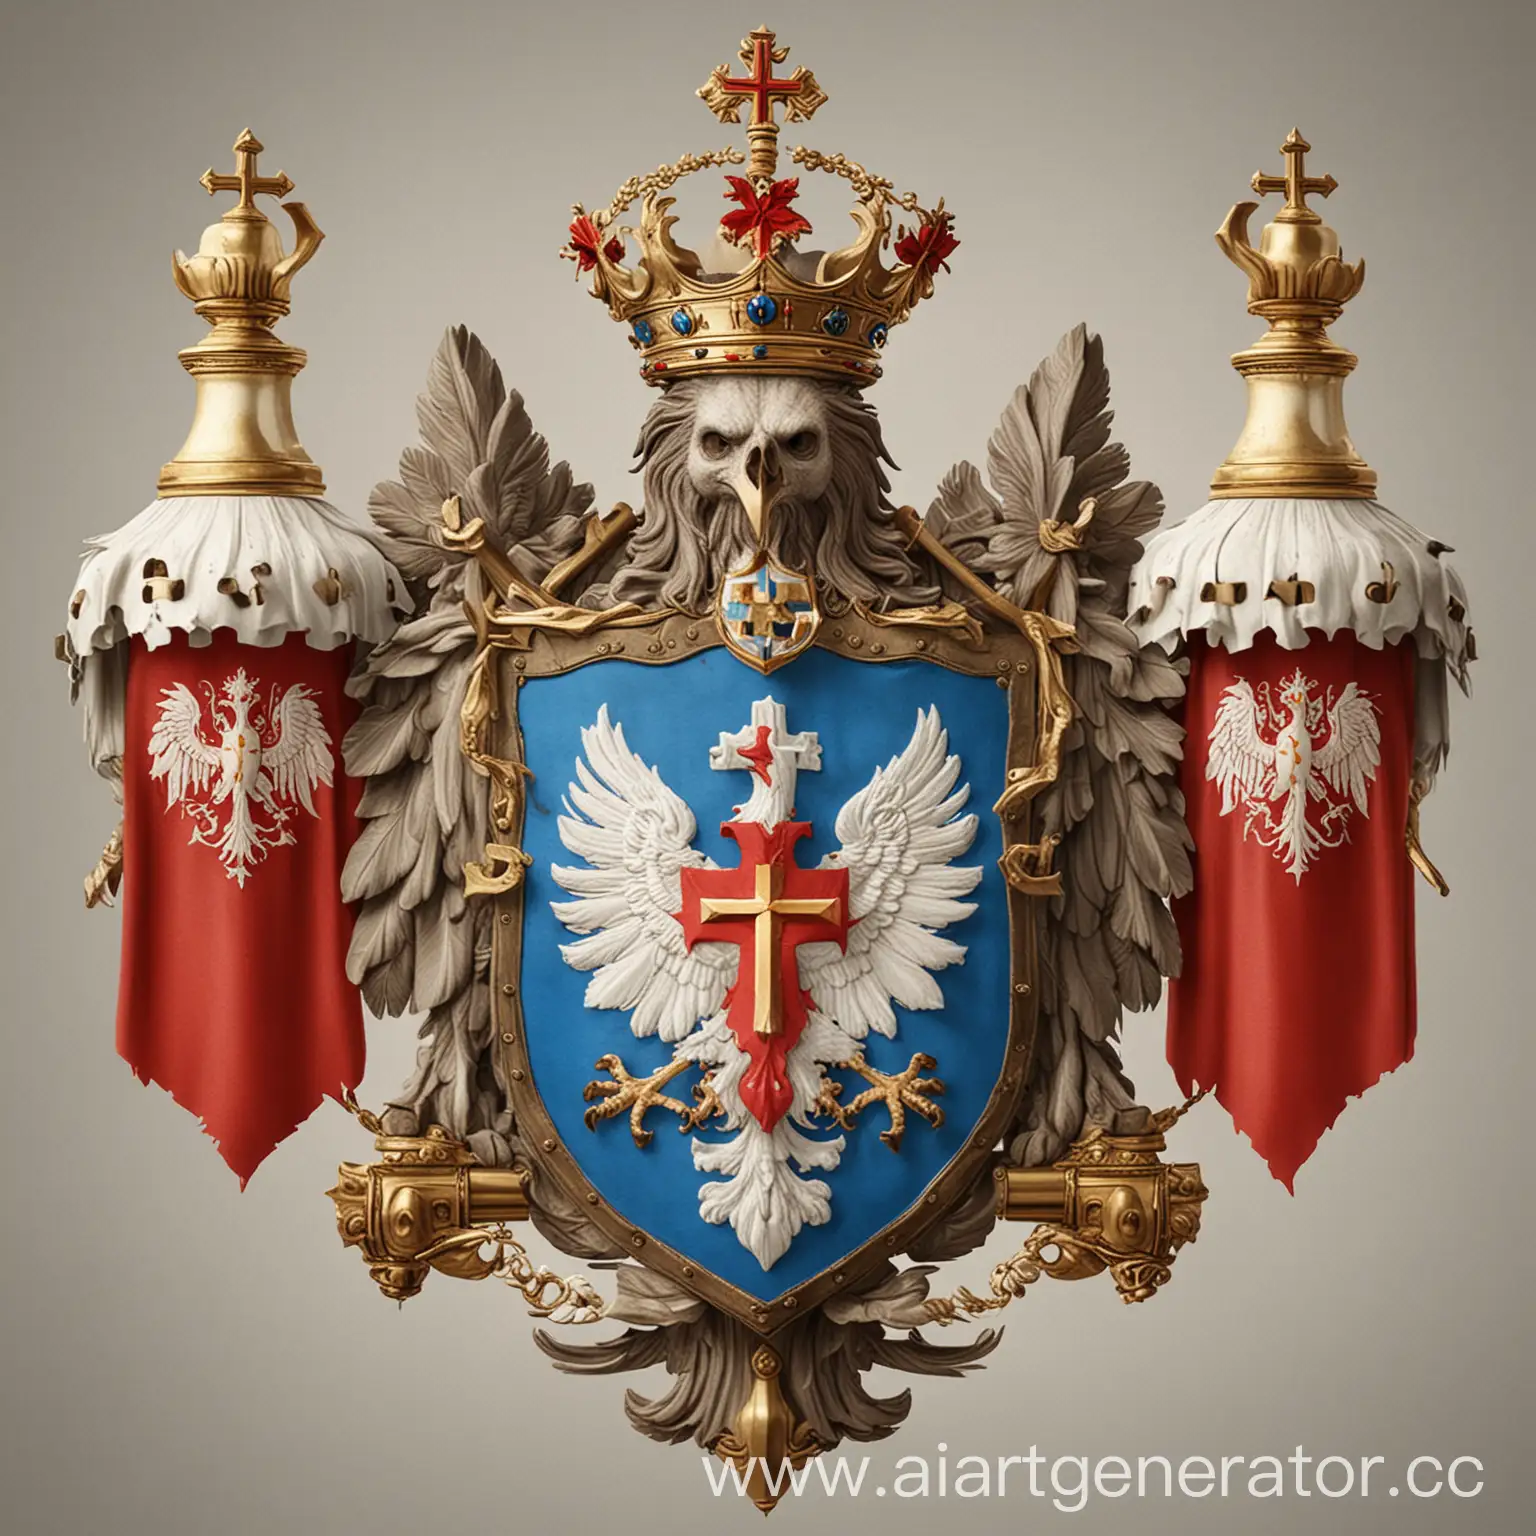 Generate a coat of arms for the country, which will have a tricolor white-red-blue tricolor, Jesus Christ, a scepter, lamps and a two-headed eagle